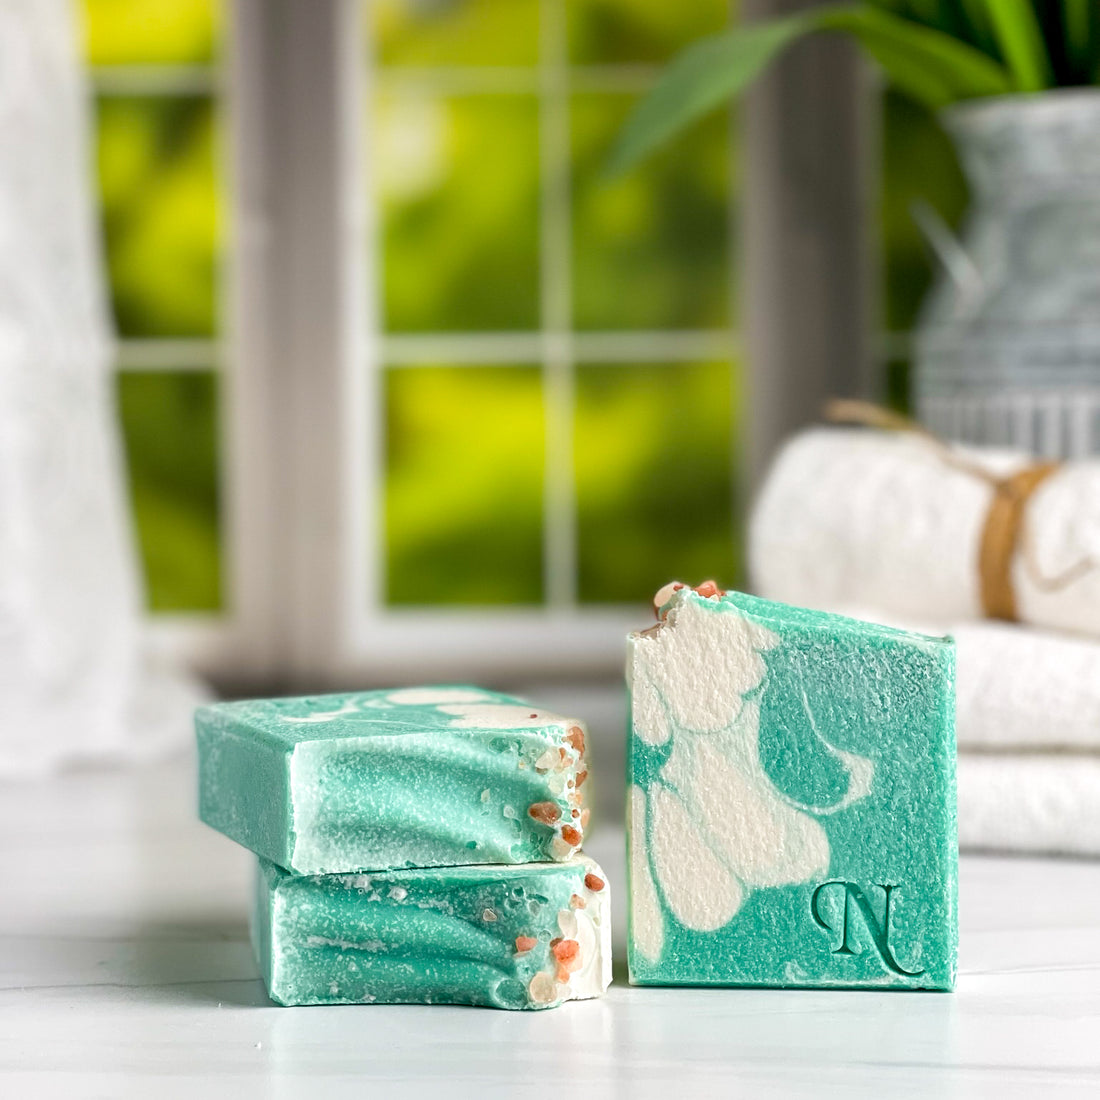 Aura Salt Soap - 3 teal green and white soaps stacked in pile of 2 and one on the side with folded towels in the background